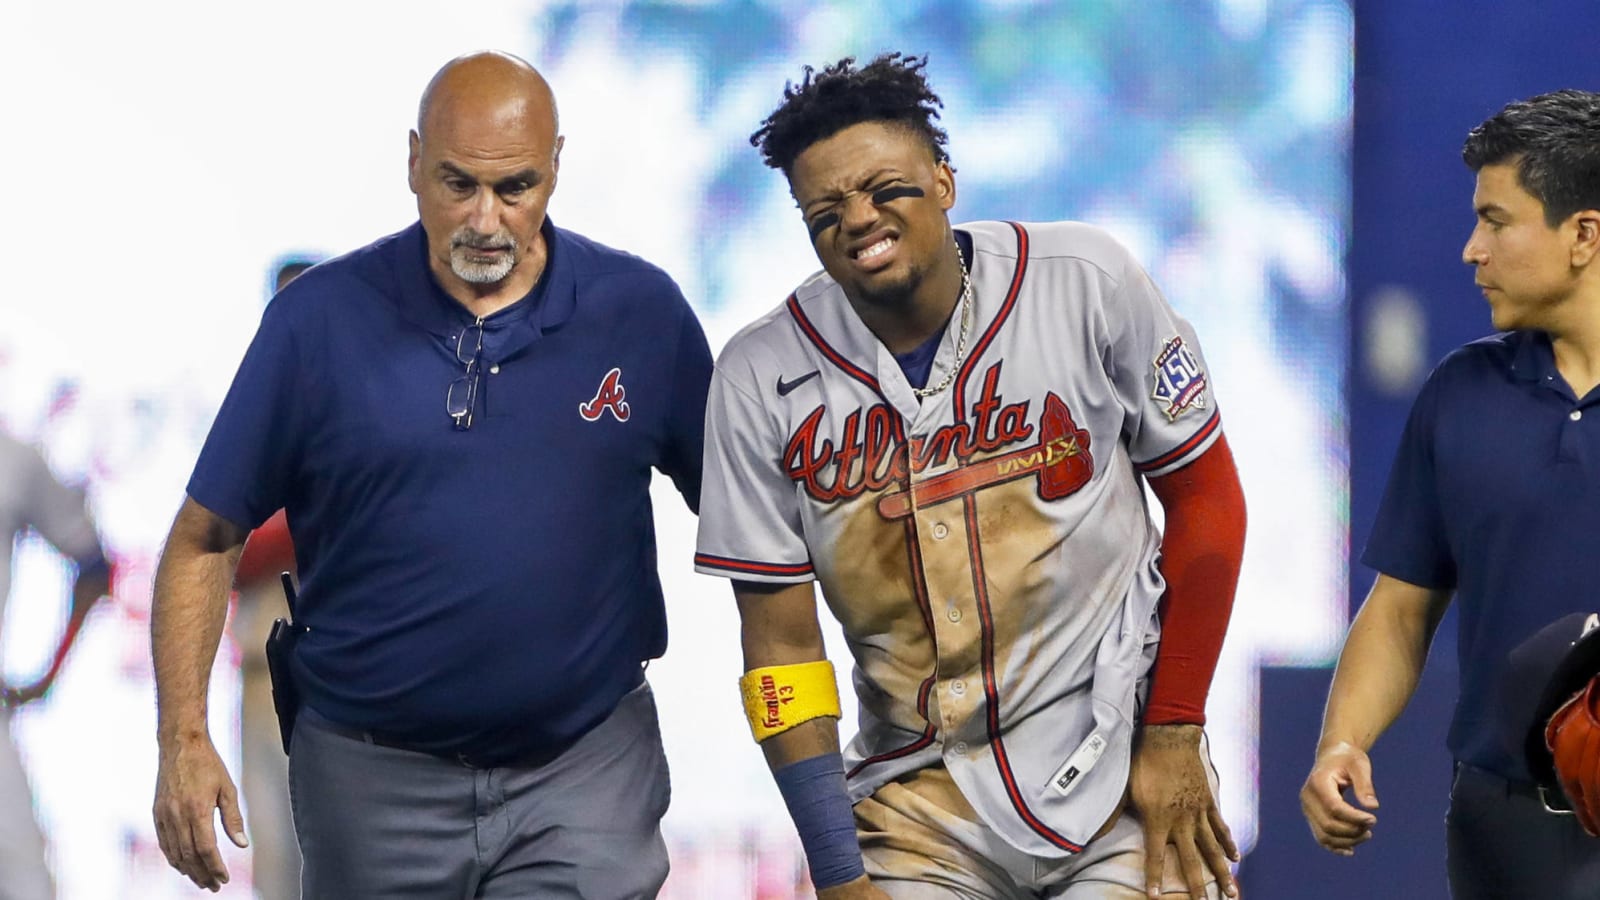 Ronald Acuna Jr. vows to return better than ever after suffering season-ending ACL tear